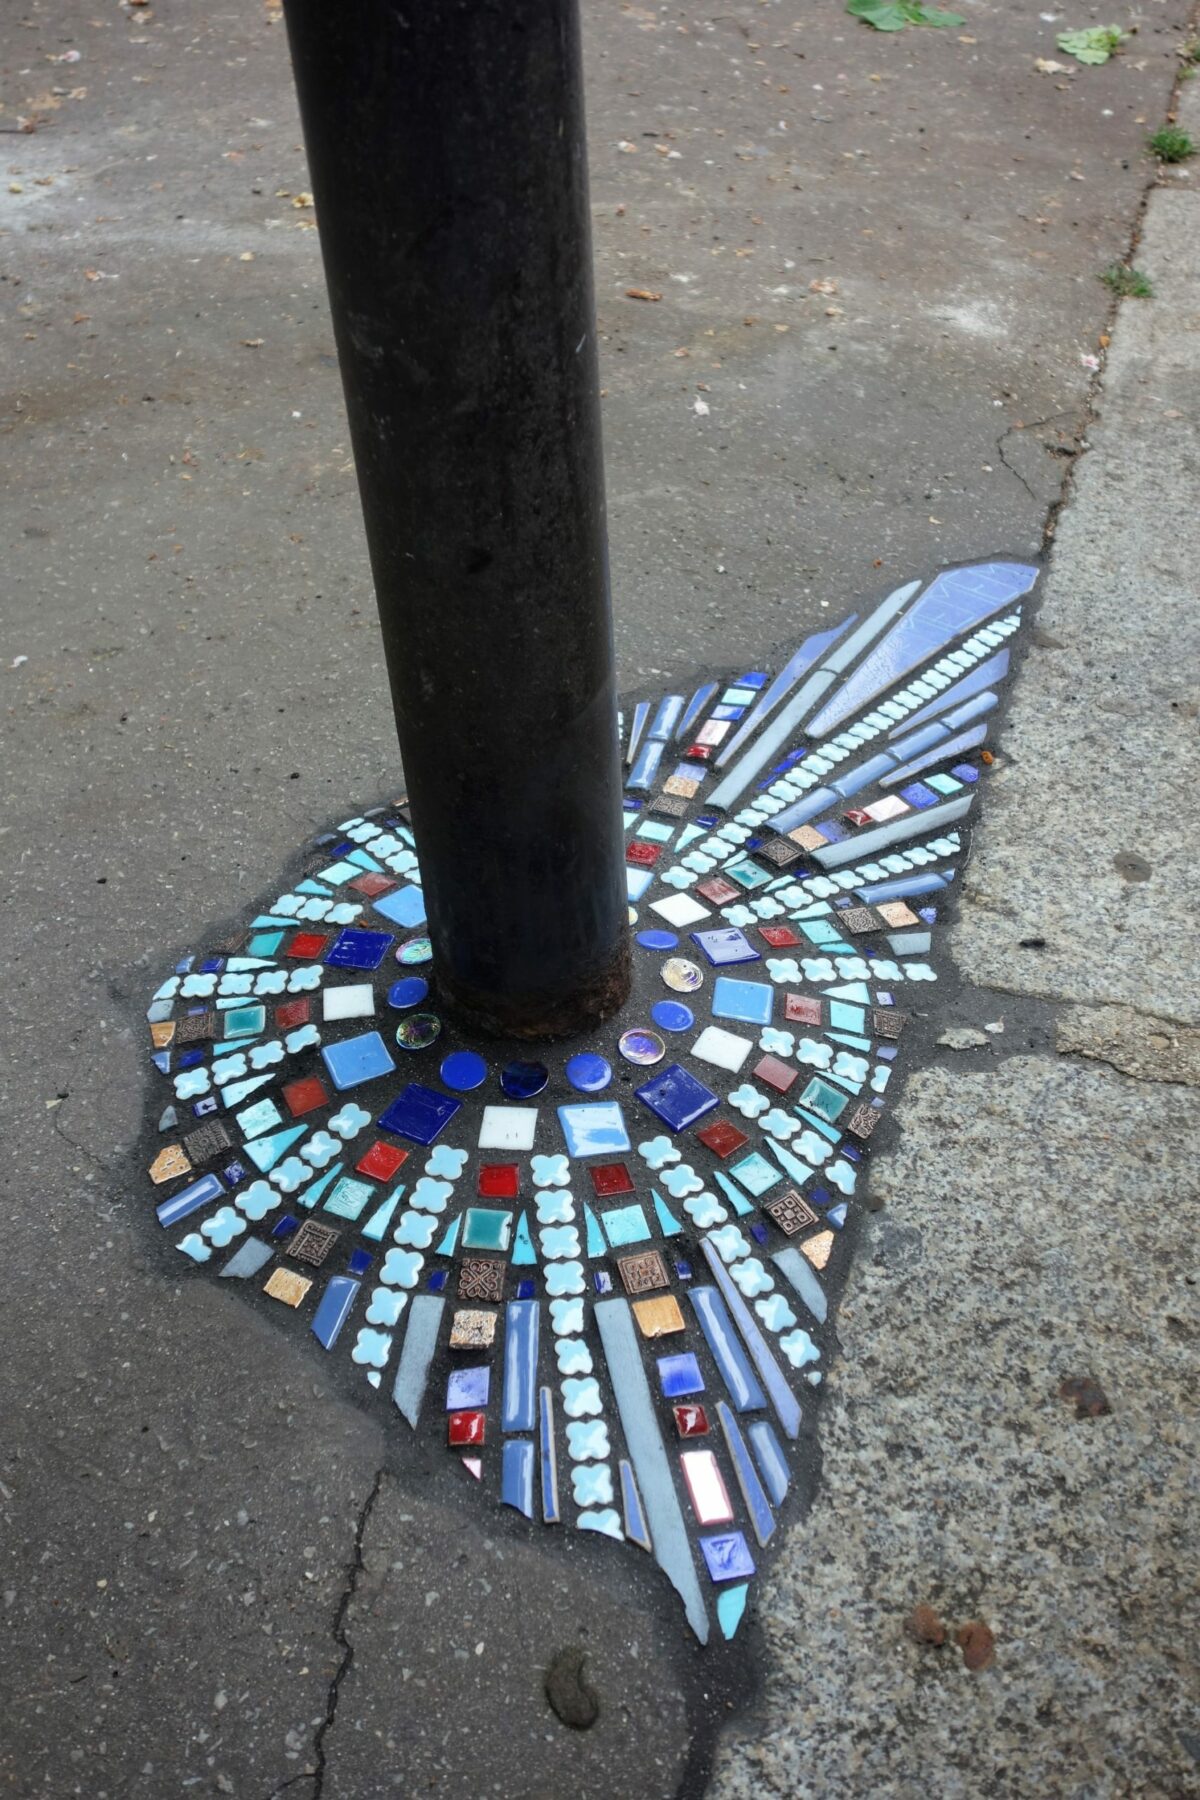 Fractured Sidewalks, Pavements, And Walls Repaired With Vibrant Tiled Mosaics By Ememem (3)